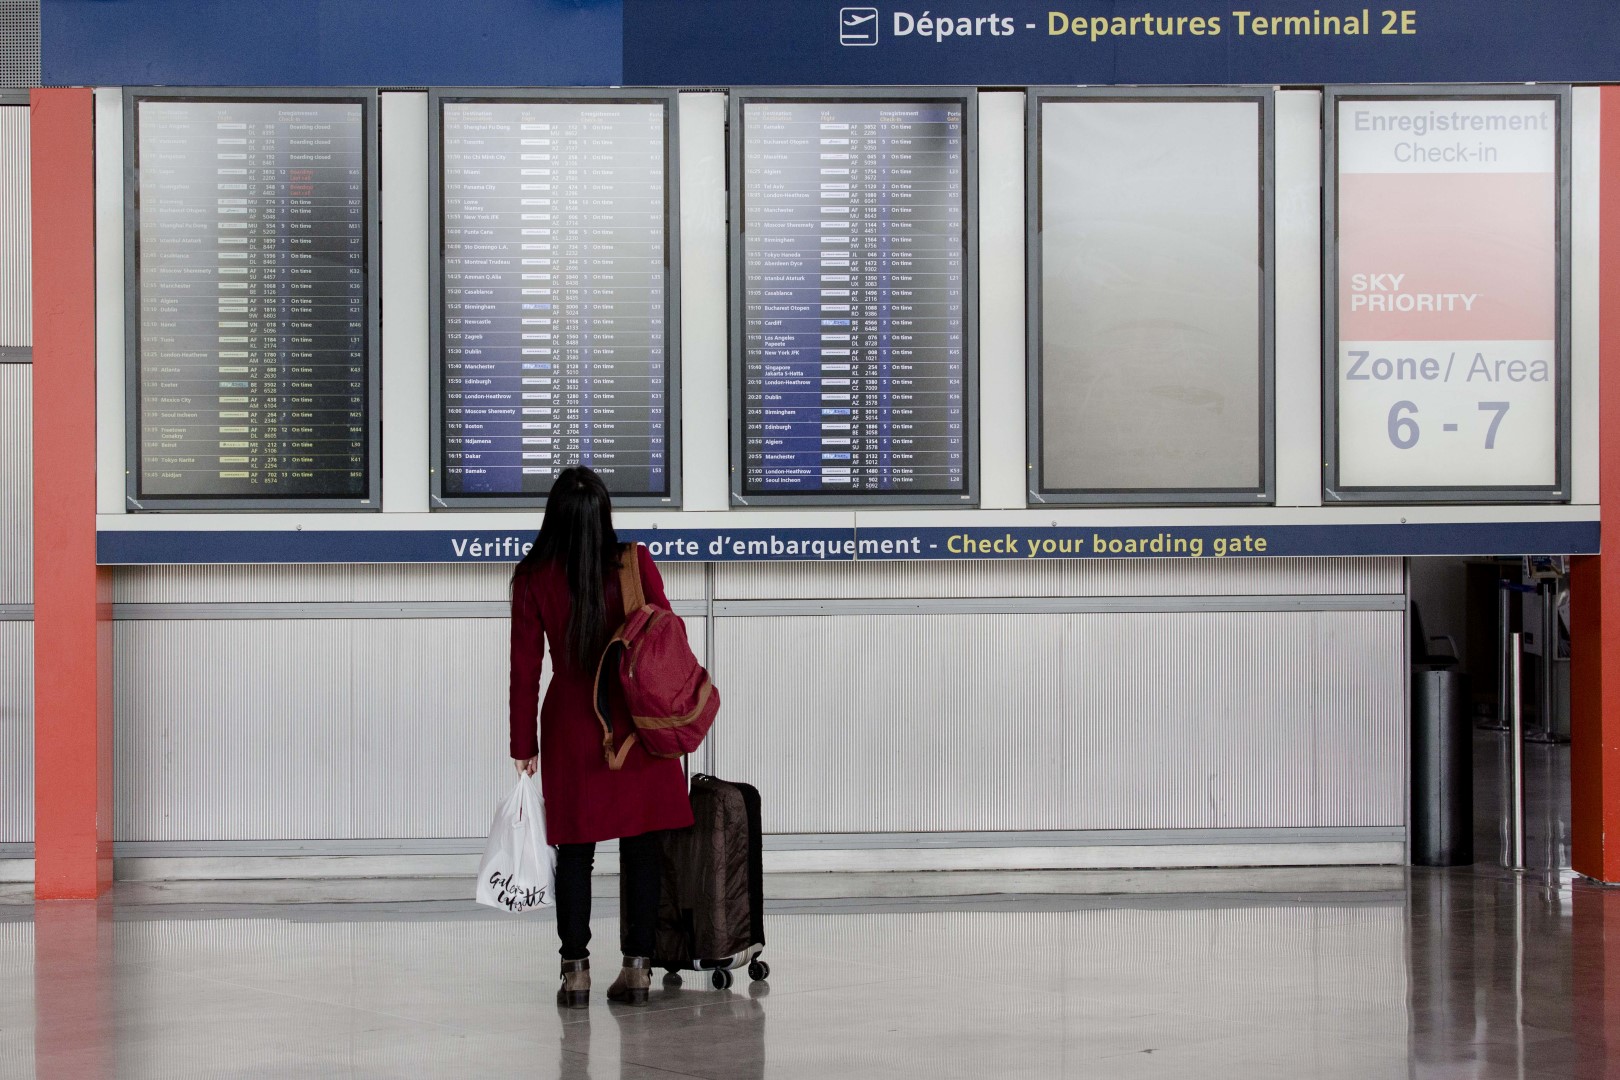 A passenger looks at flight departure information screens at Charles de Gaulle airport, operated by Aeroports de Paris, in Paris, France, on Thursday, Jan. 28, 2016. Air France-KLM Group Chief Executive Officer Alexandre De Juniac is negotiating with unions representing cabin and ground crews at the Air France brand and Dutch division KLM, as well as pilots at the French unit, after pulling a plan to expand its Transavia low-cost arm across Europe. Photographer: Marlene Awaad/Bloomberg